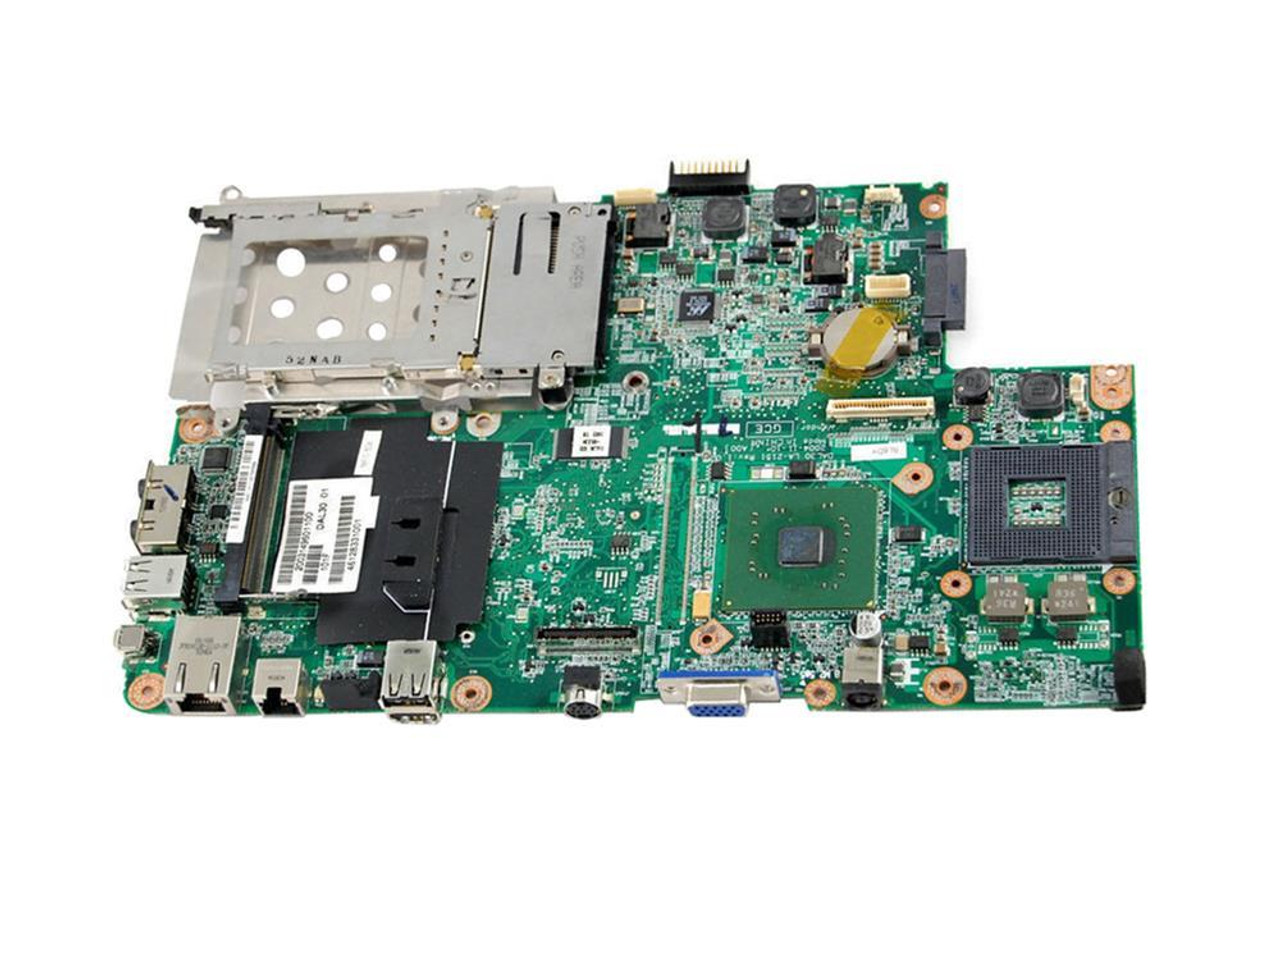 0W9259 Dell System Board (Motherboard) for Inspiron 6000 (Refurbished)